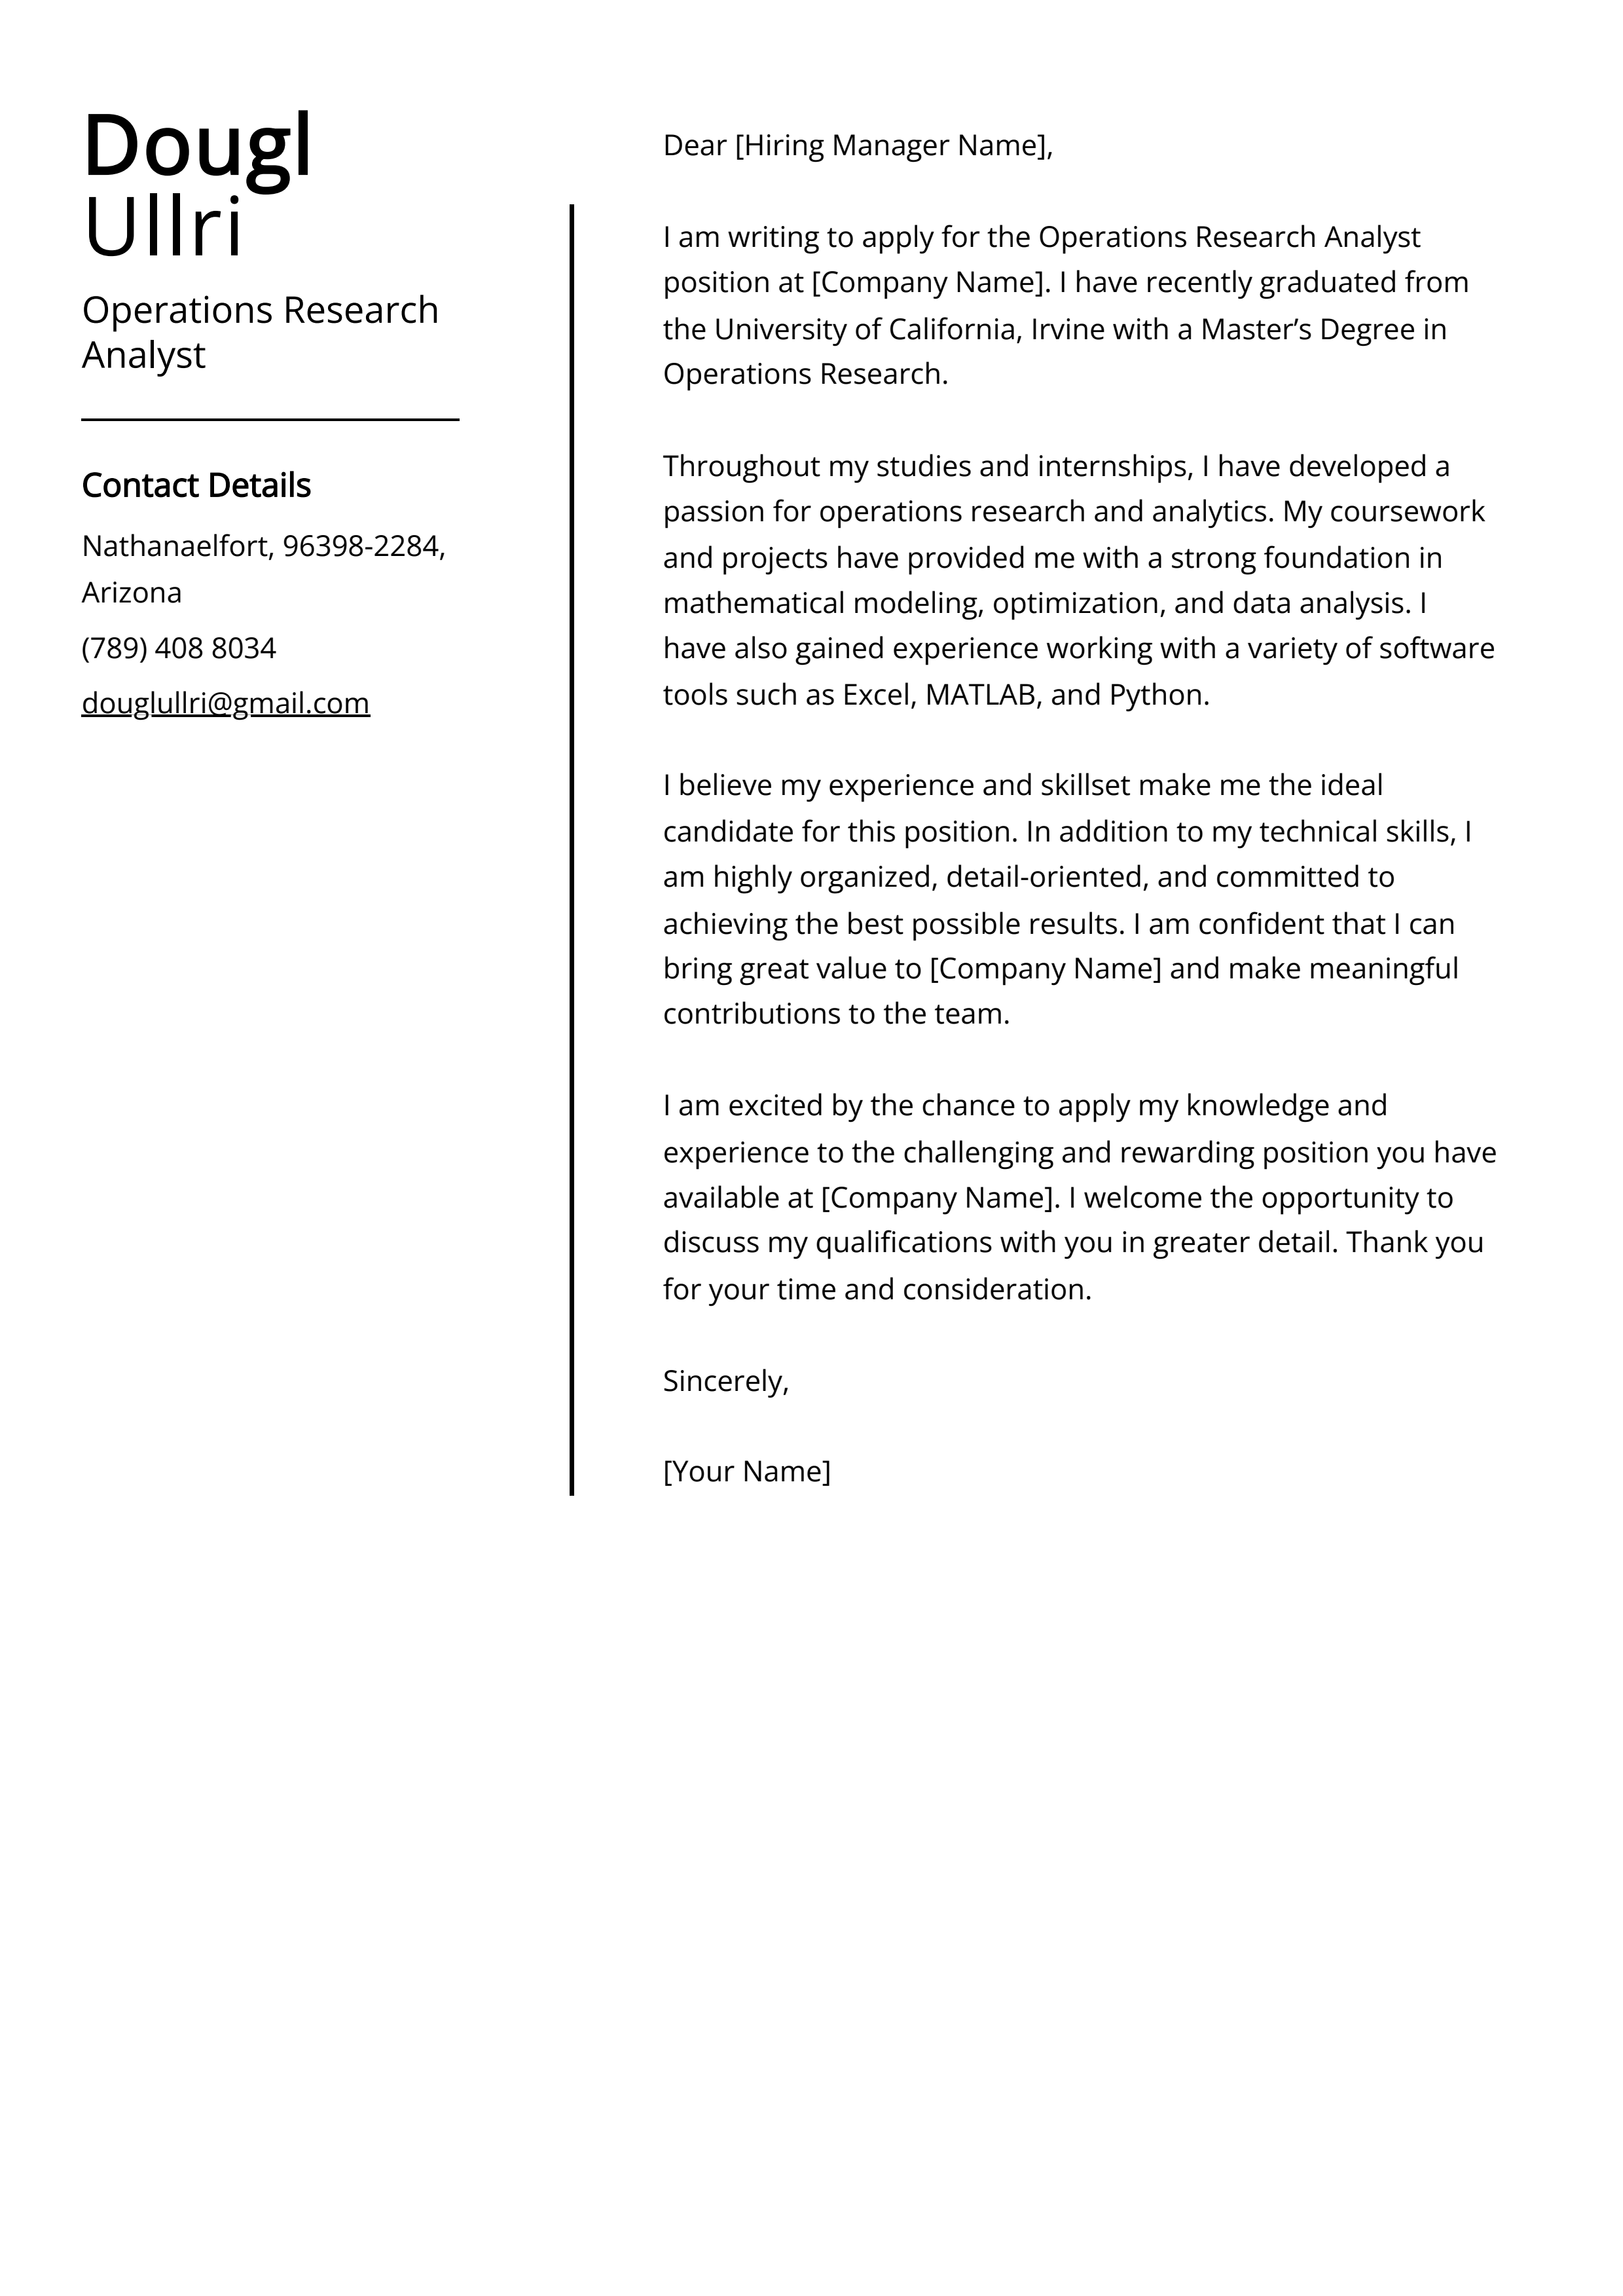 Operations Research Analyst Cover Letter Example